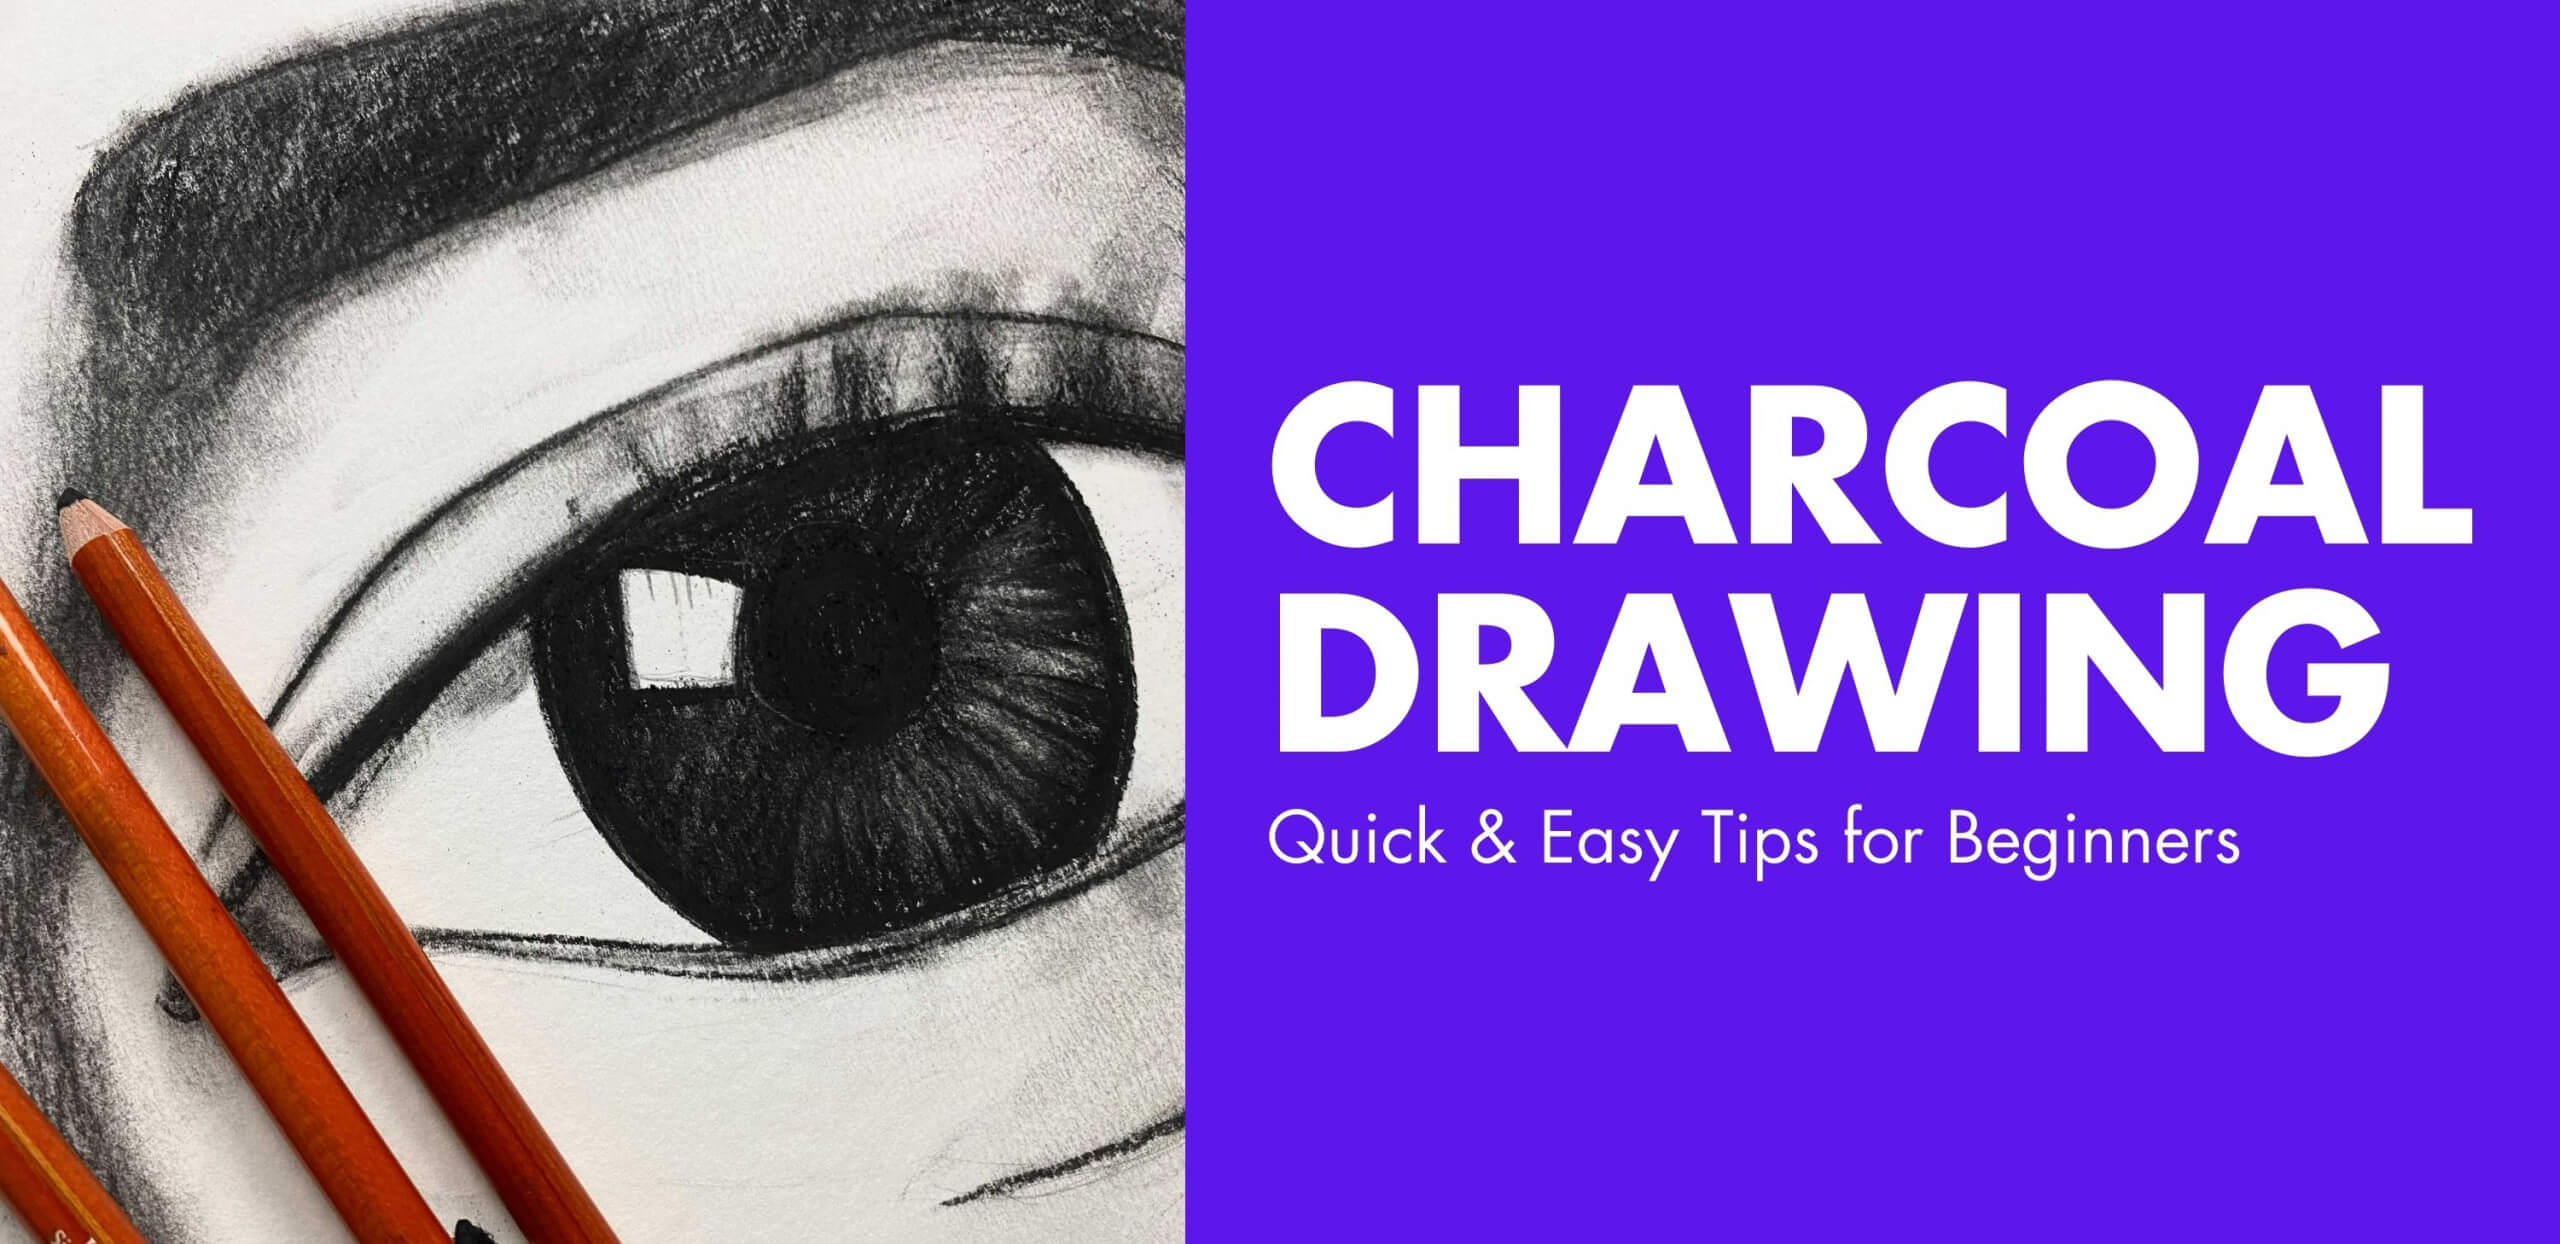 Charcoal: Techniques & Tutorials for the Complete Beginner, Richard  Rochester I Books I Art Supplies